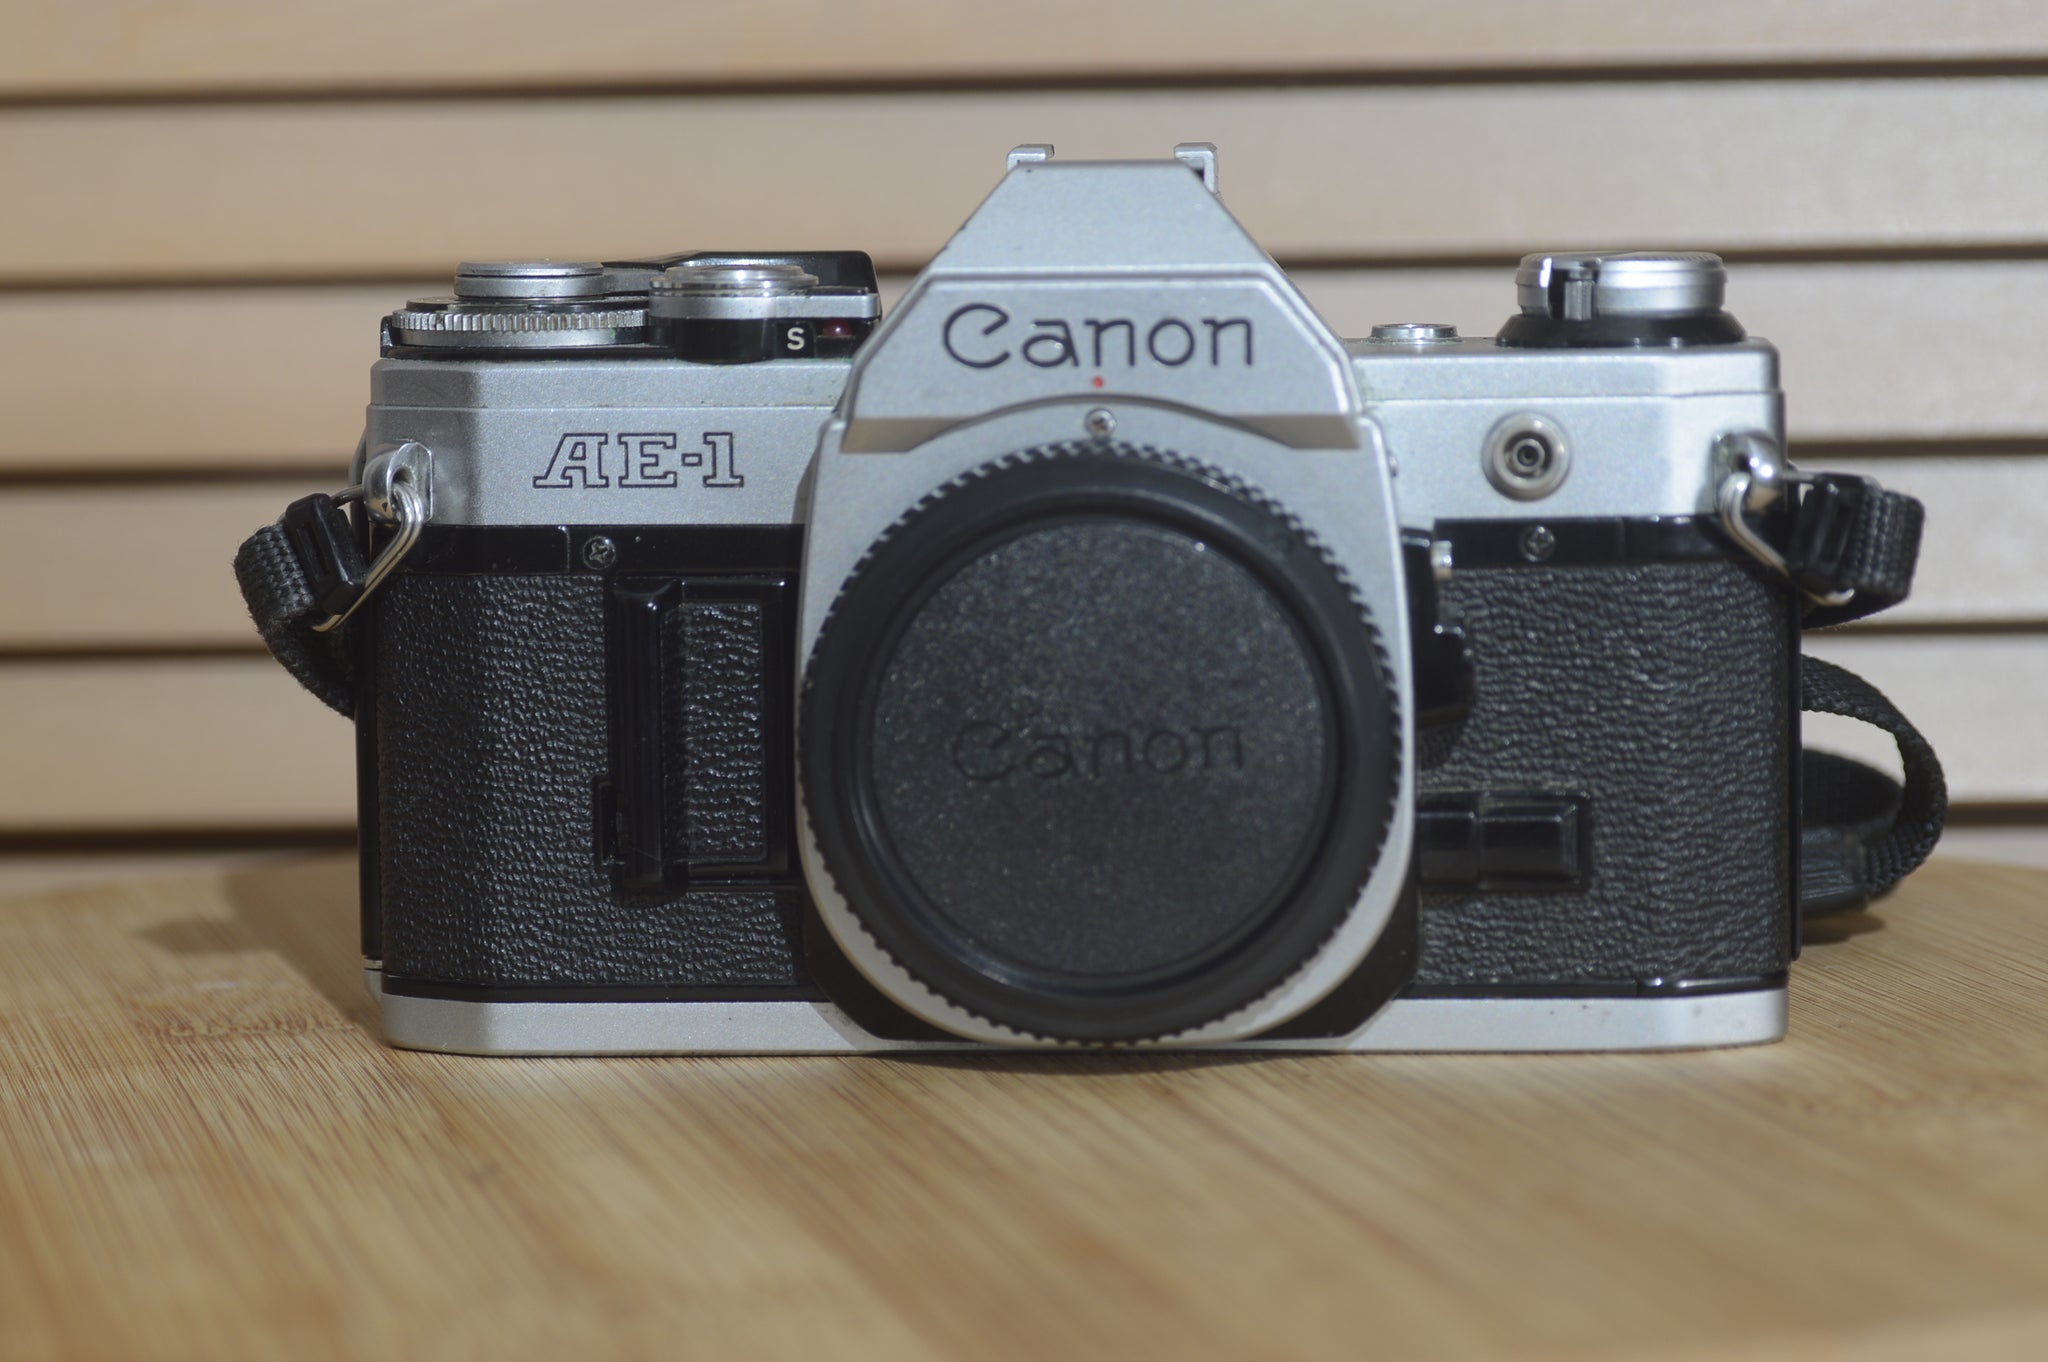 Iconic Canon AE1 Body only, classic from Canon, that is now very collectable and you can see why ! A must for the Canon collector! - RewindCameras quality vintage cameras, fully tested and se